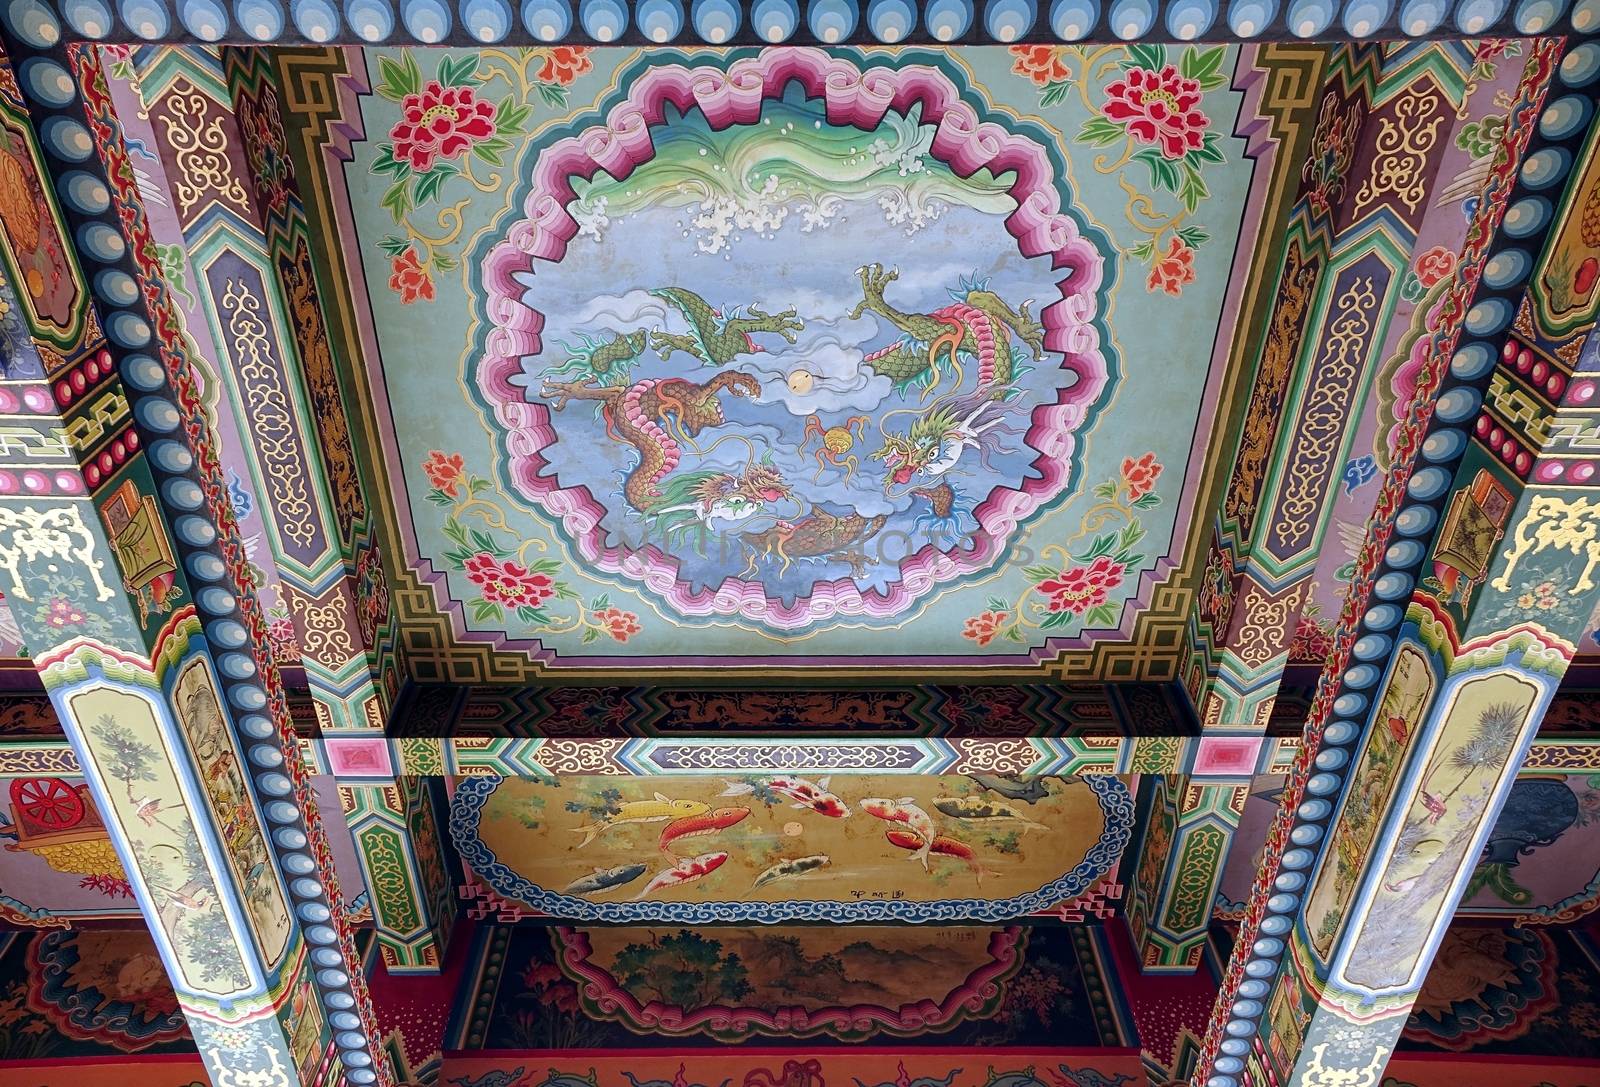 Richly Decorated Temple Ceiling of the Wumiao Temple by shiyali